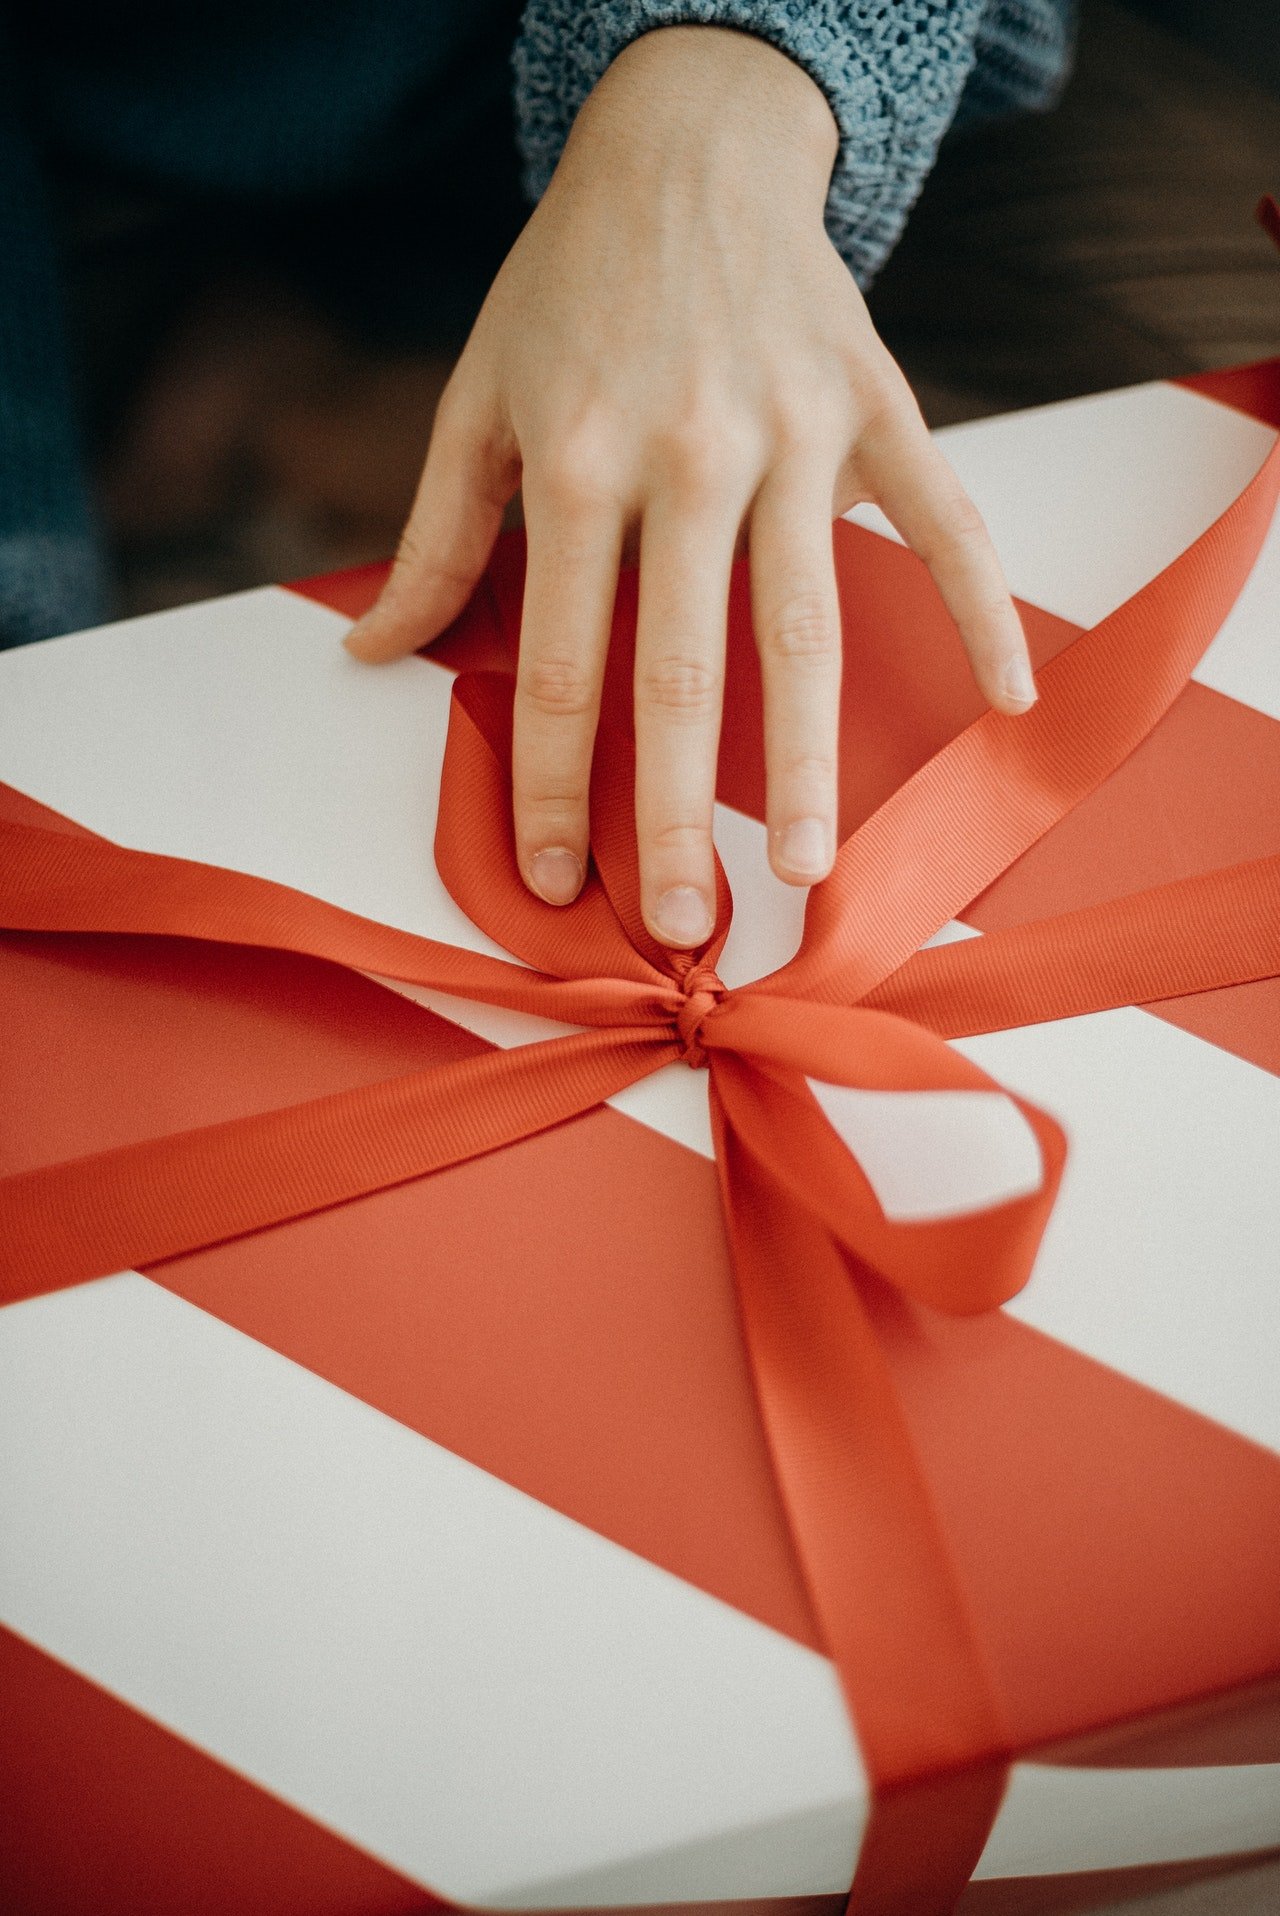 Mrs. Gilligan was right outside carrying a boxed present. | Source: Pexels